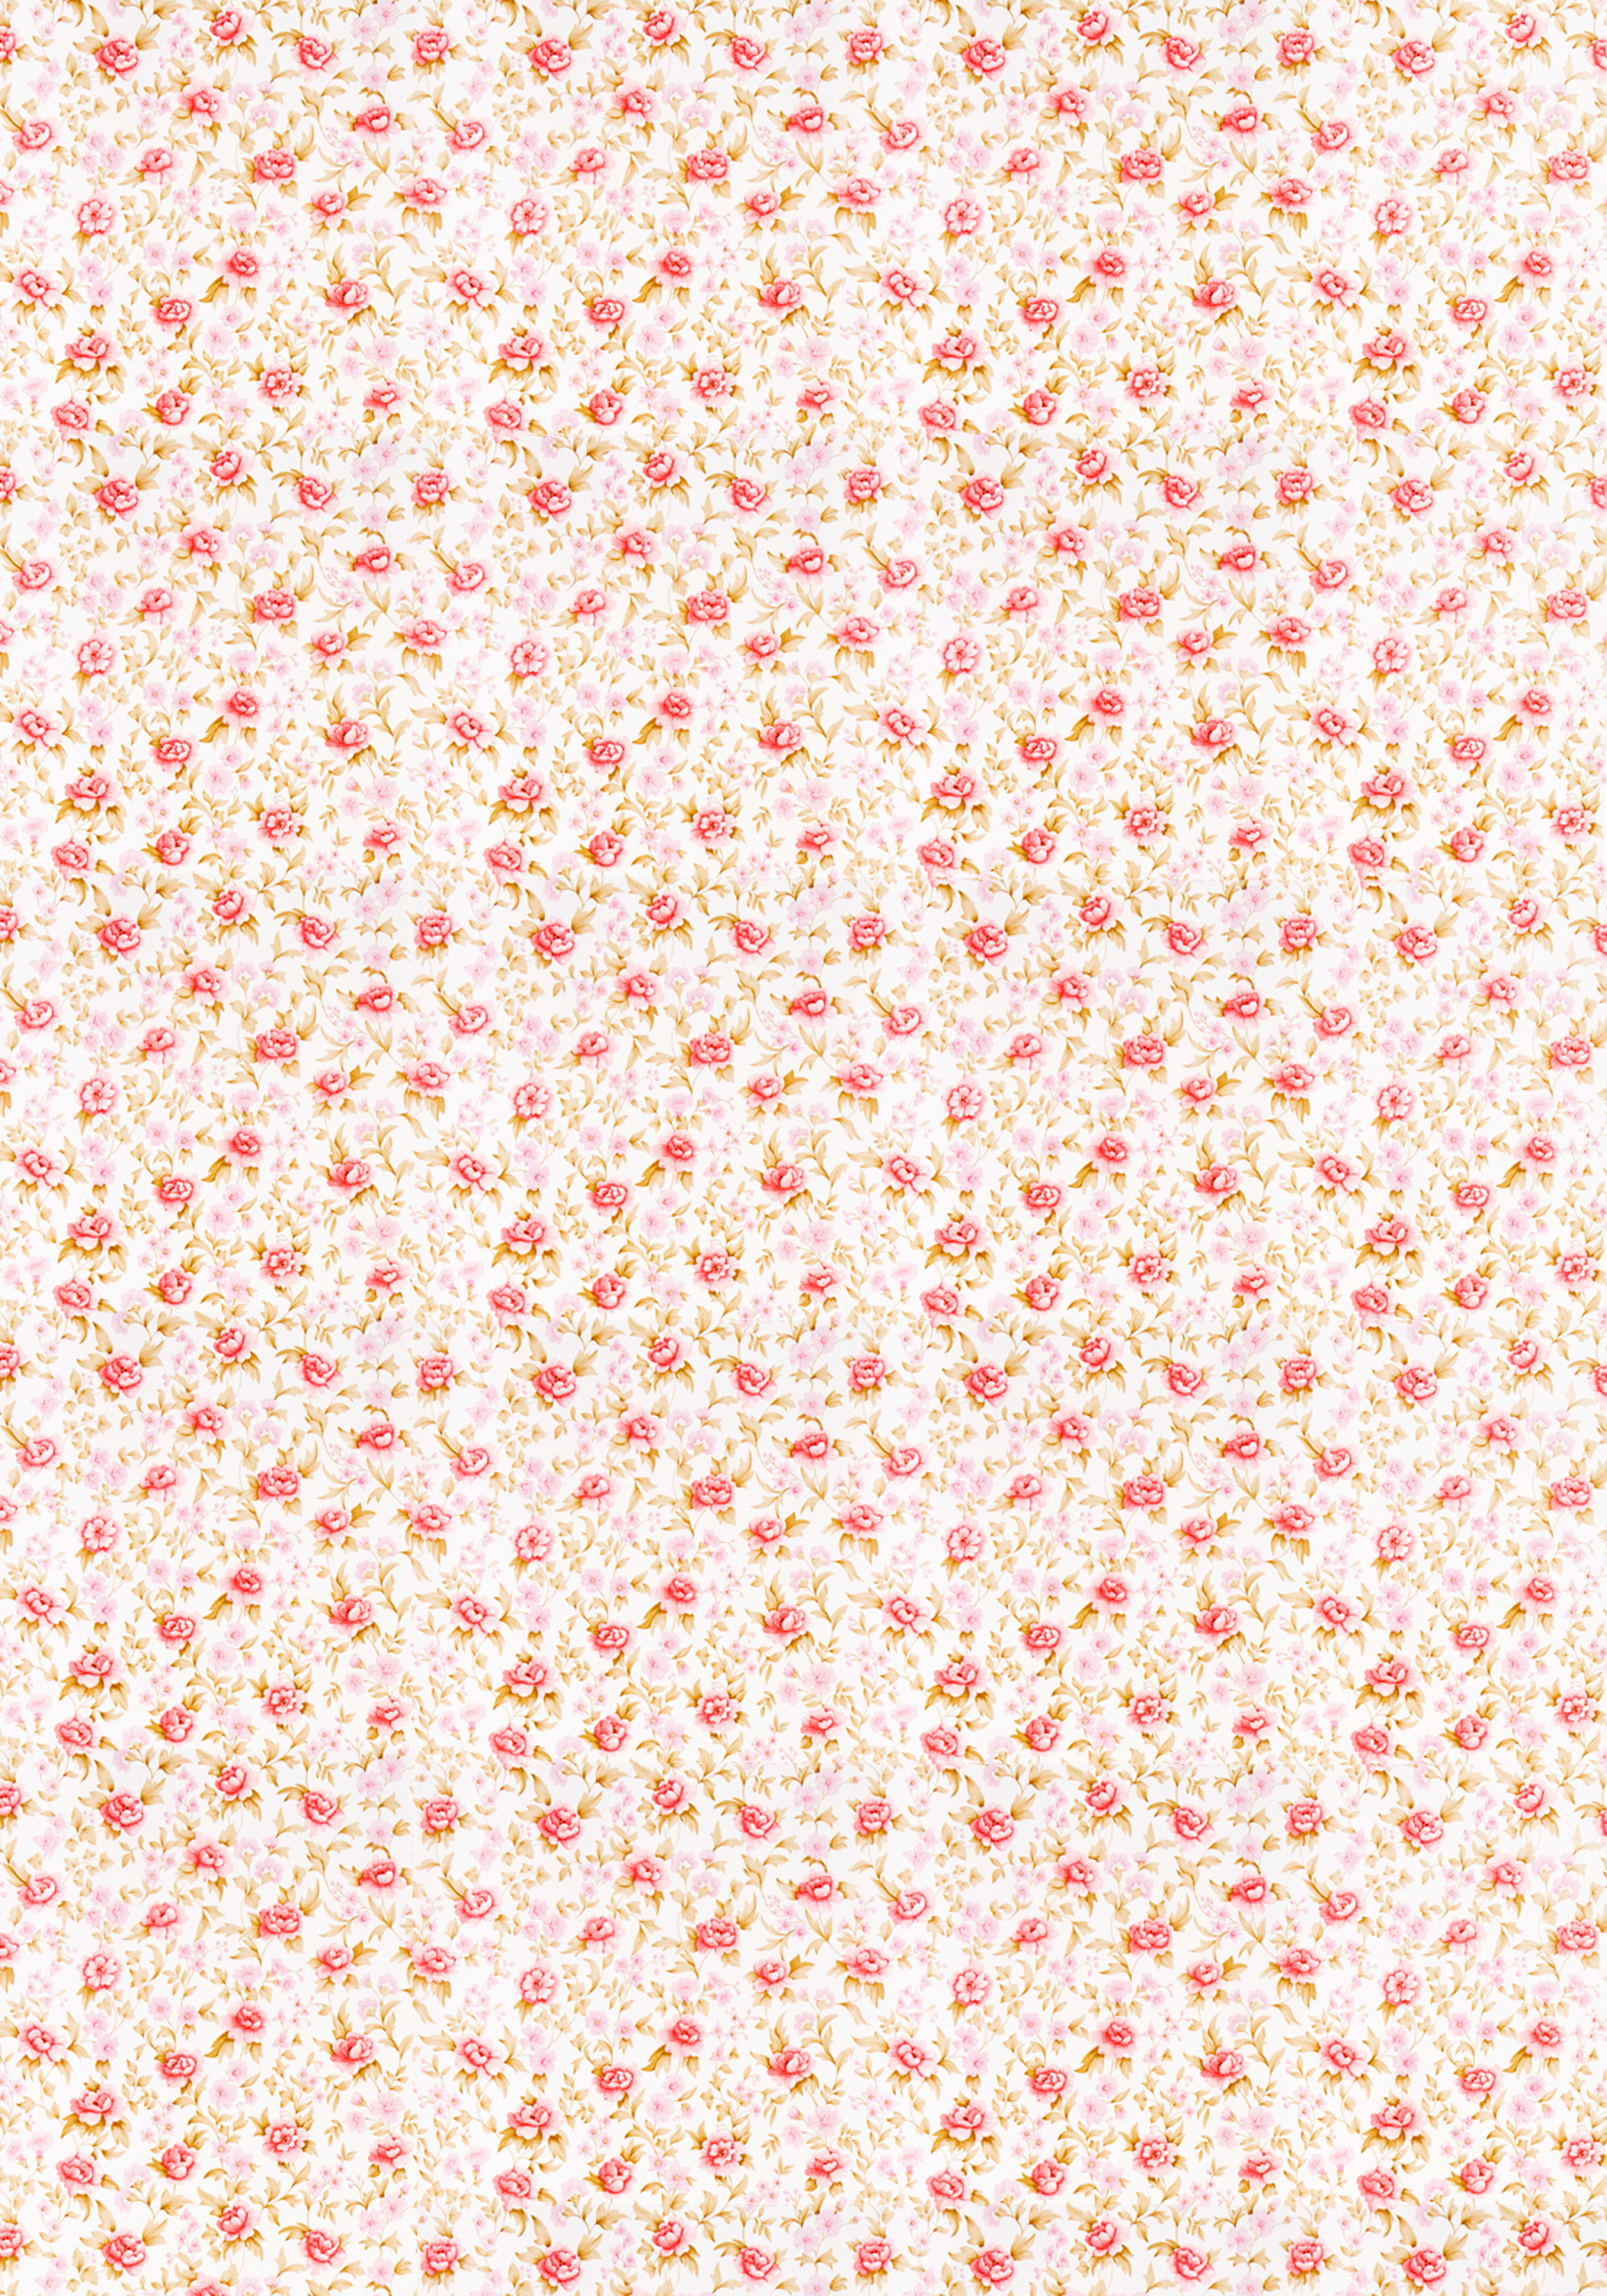 2100x3000 Wallpaper with small roses